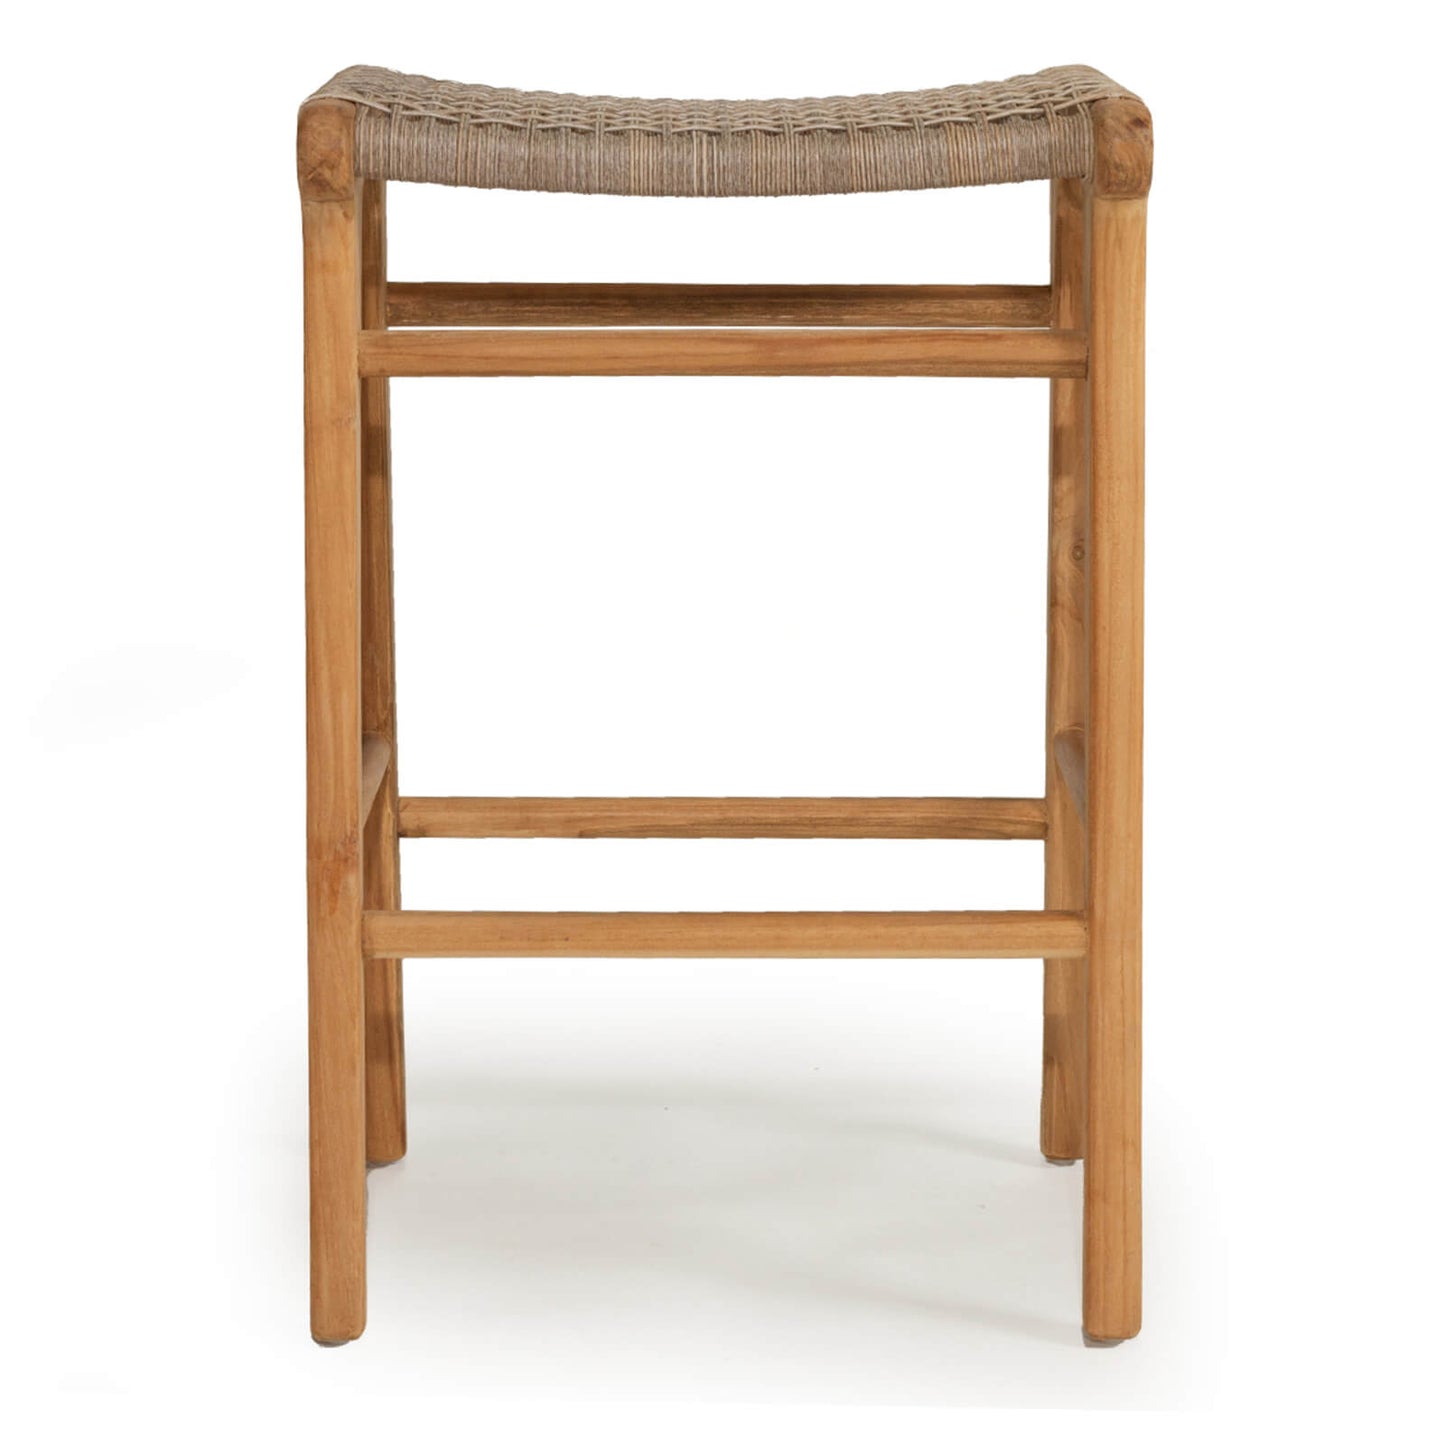 Augusta | Coastal Outdoor Corded Wooden Backless Bar Stools | Washed Grey